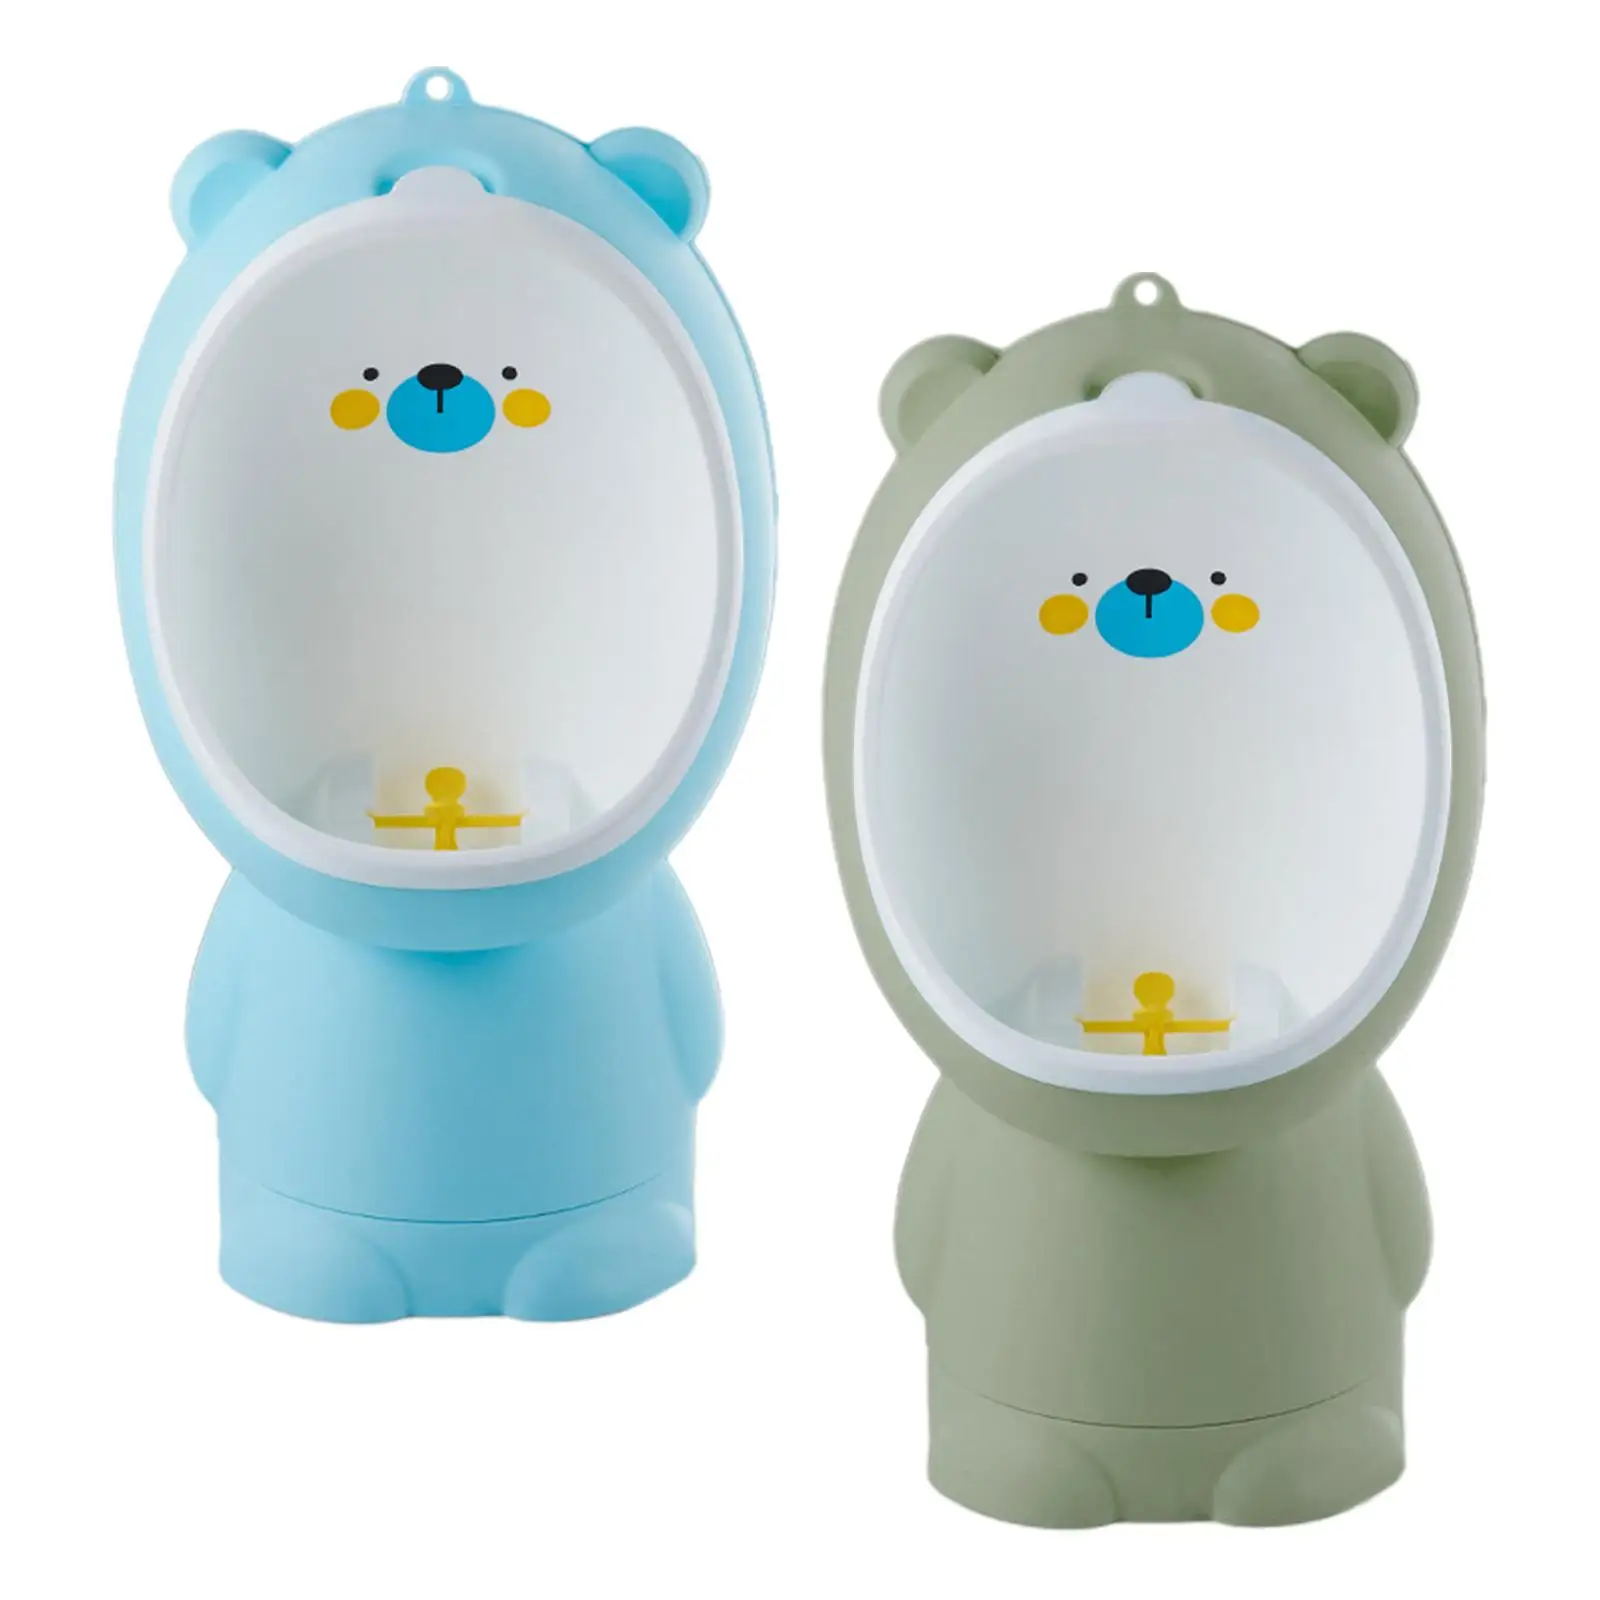 Wall Mounted Urinal Pee Trainer Standing Potty Urinal Urinals Toilet Training for Baby Boys Kids Toddlers Child